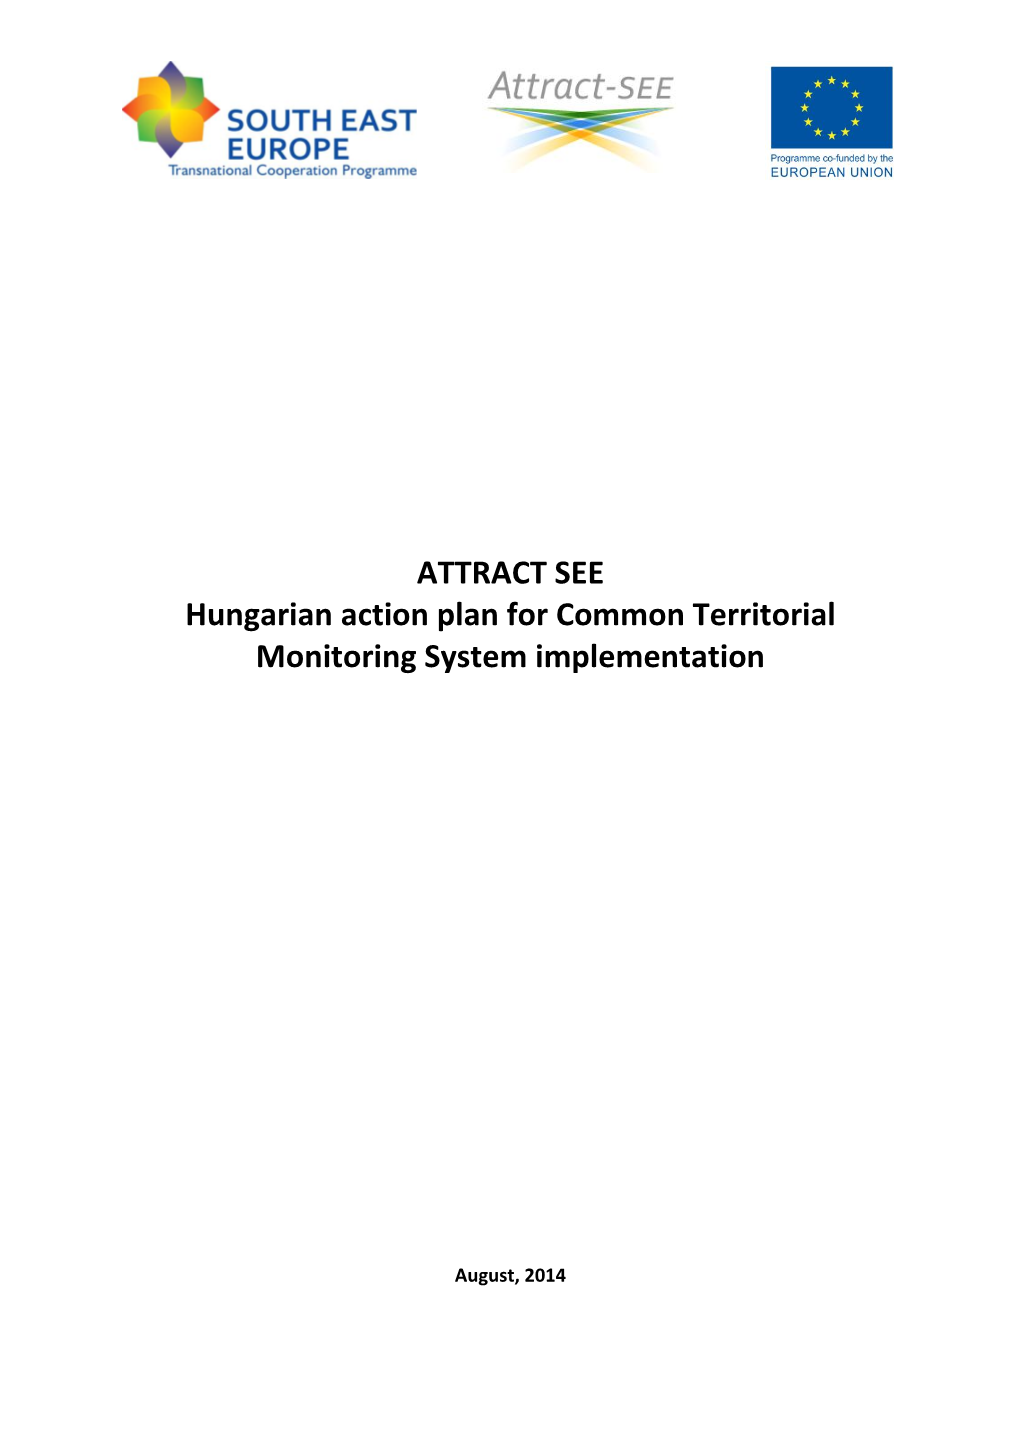 Action Plan for Common Territorial Monitoring System Implementation